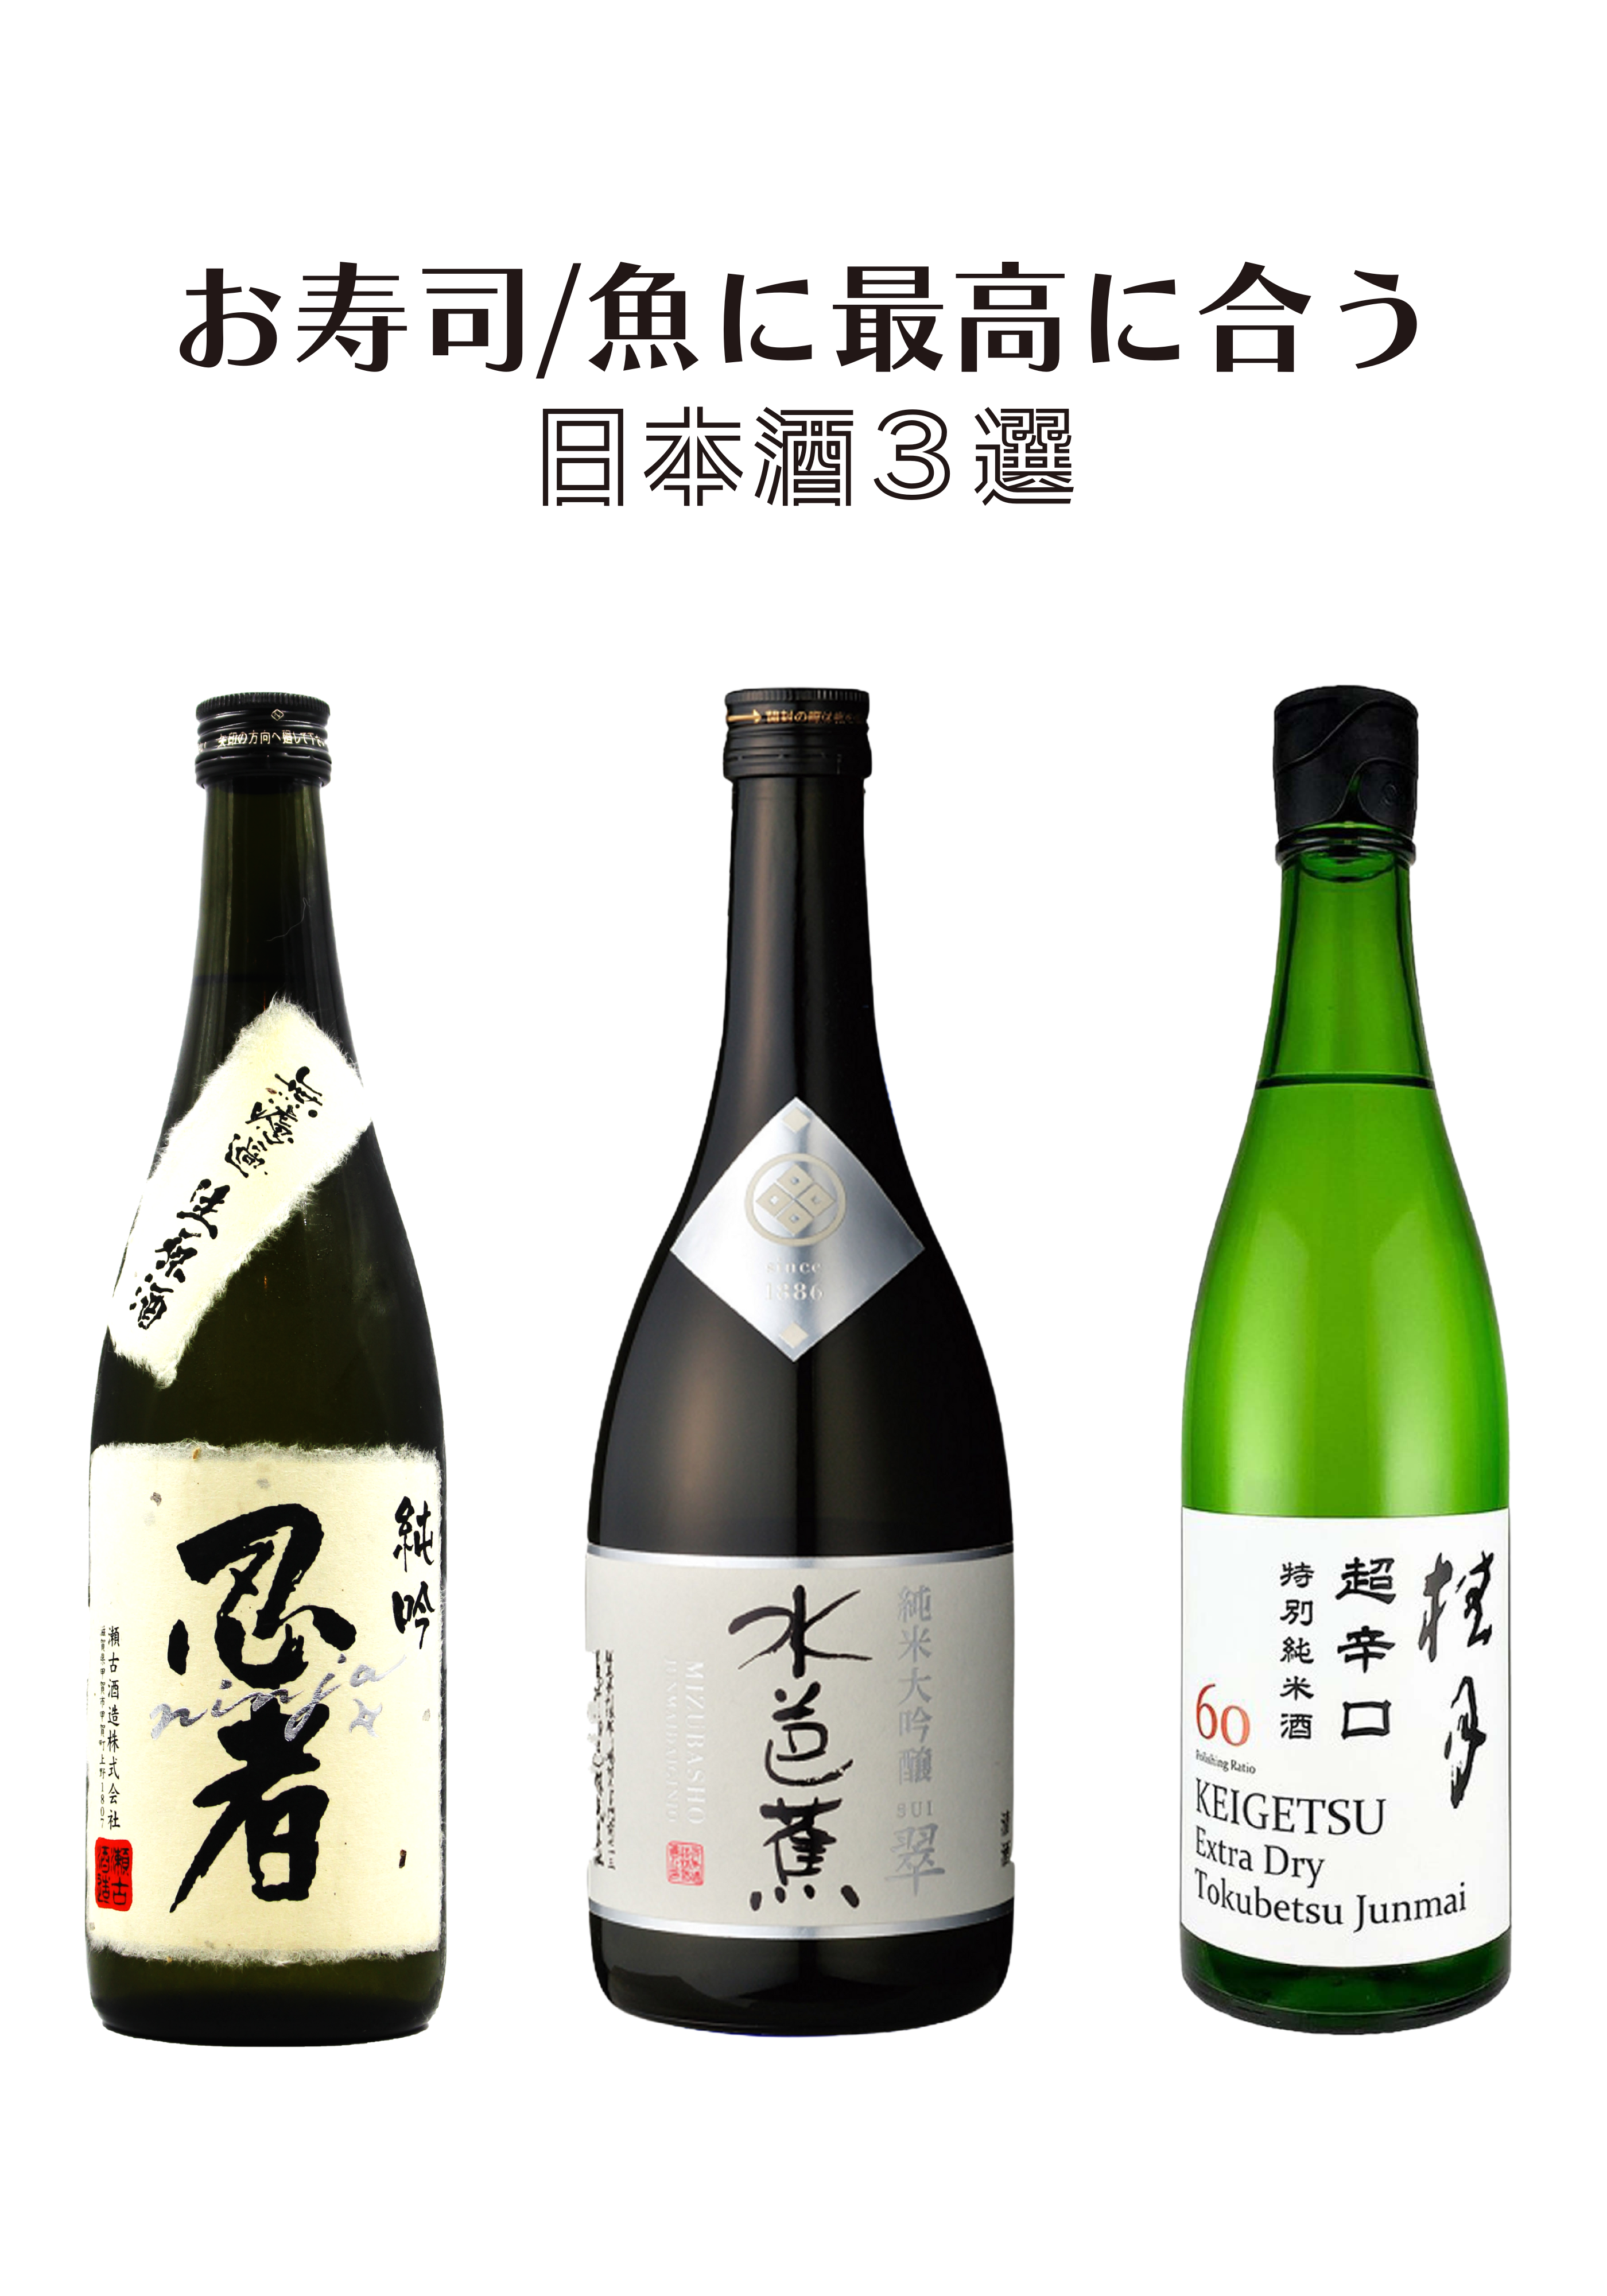 A set of 3 Japanese sake that goes well with sushi and fish